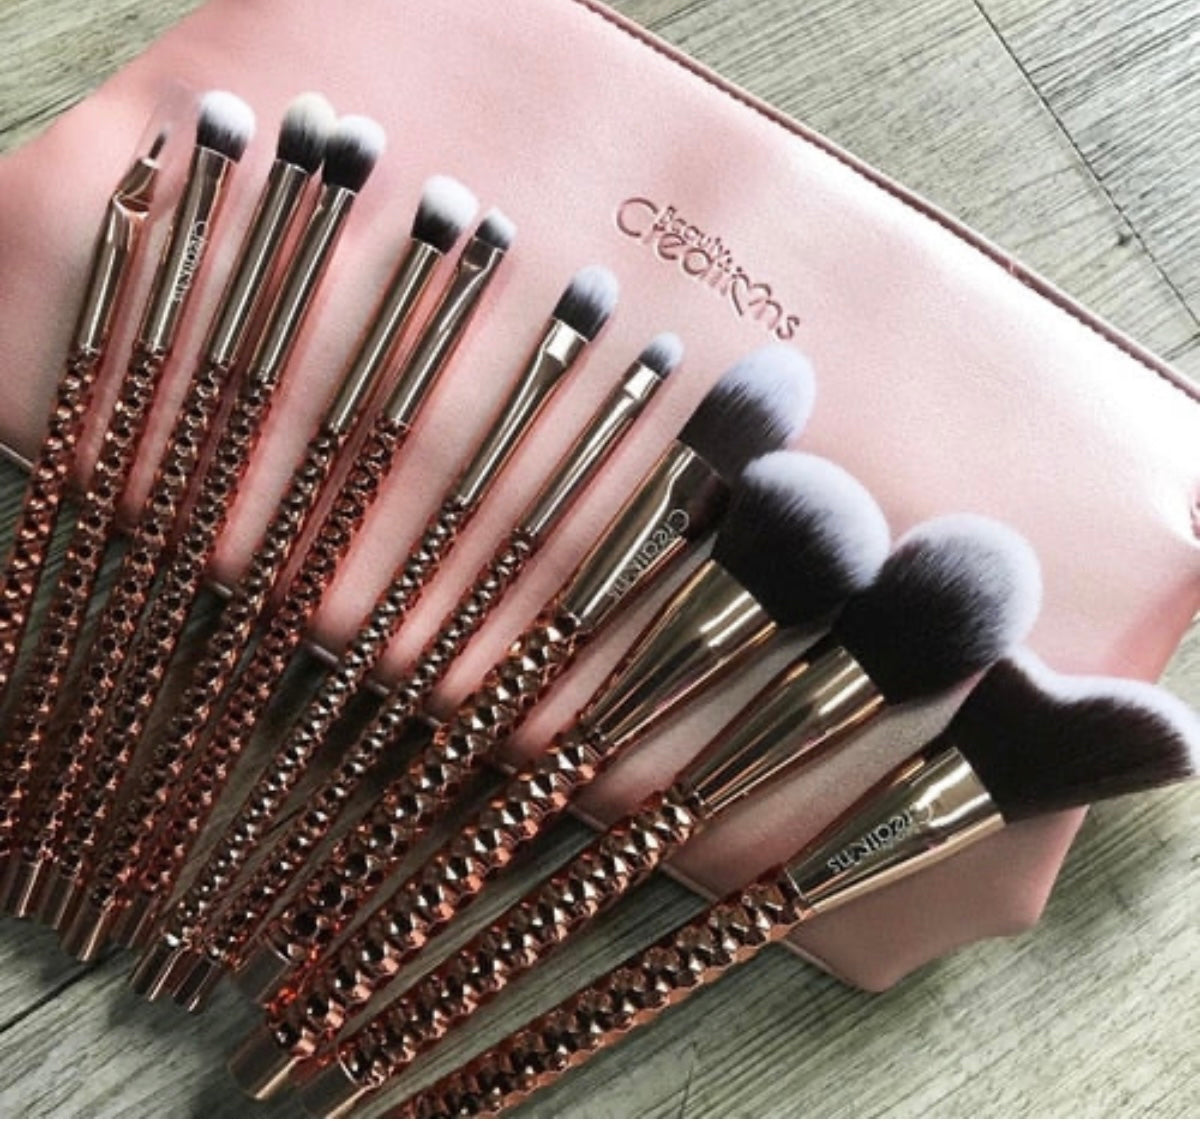 Beauty Creations 12 pc Brush Collection